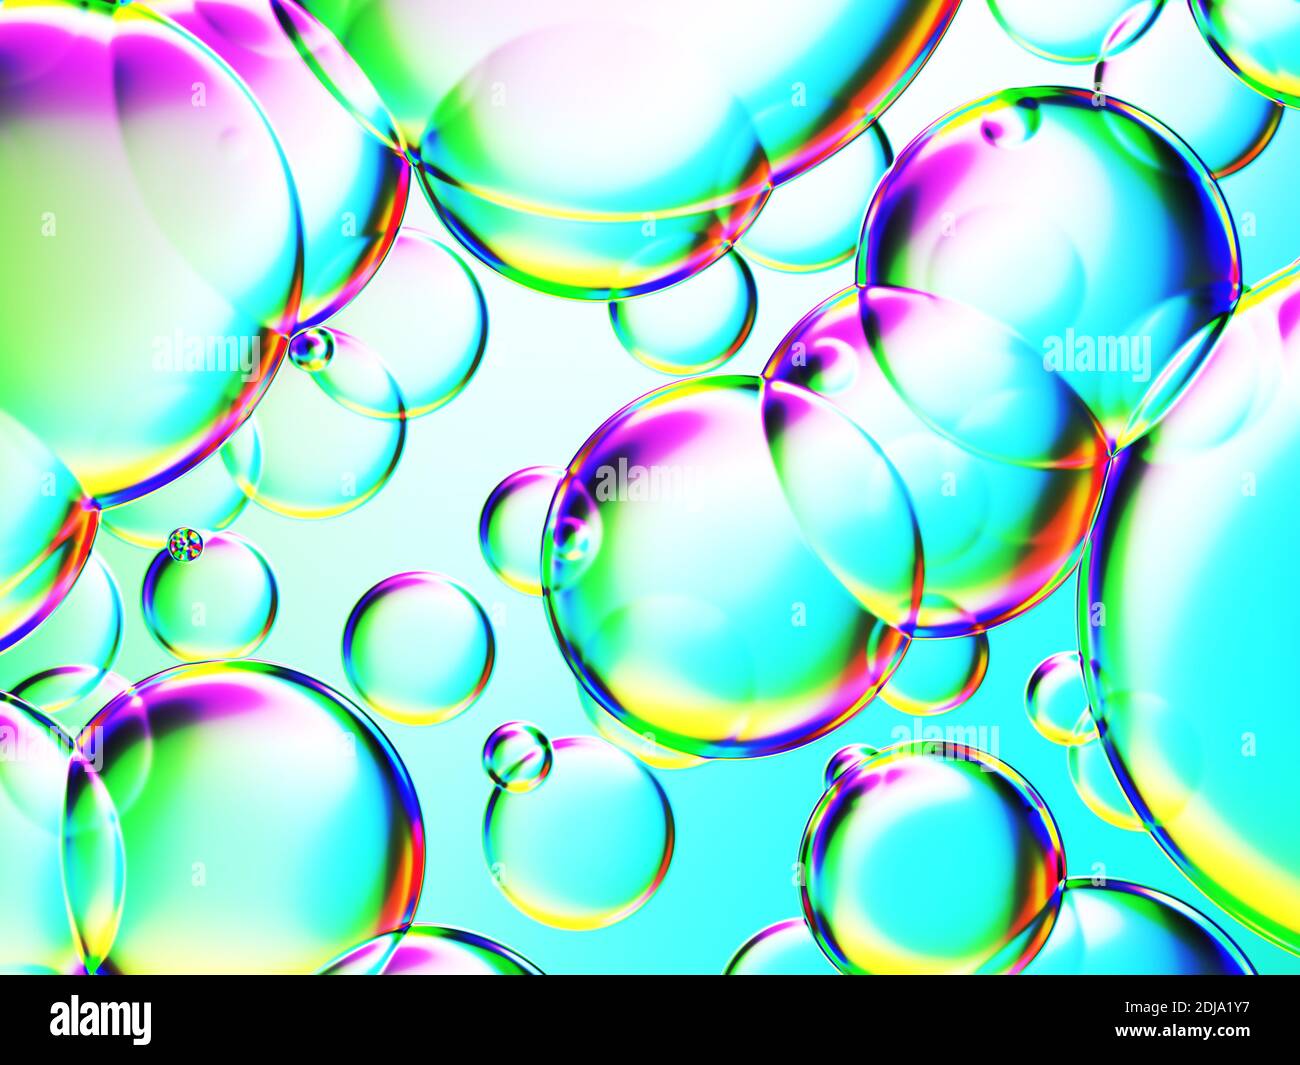 Illustration of some colorful bubbles background Stock Photo